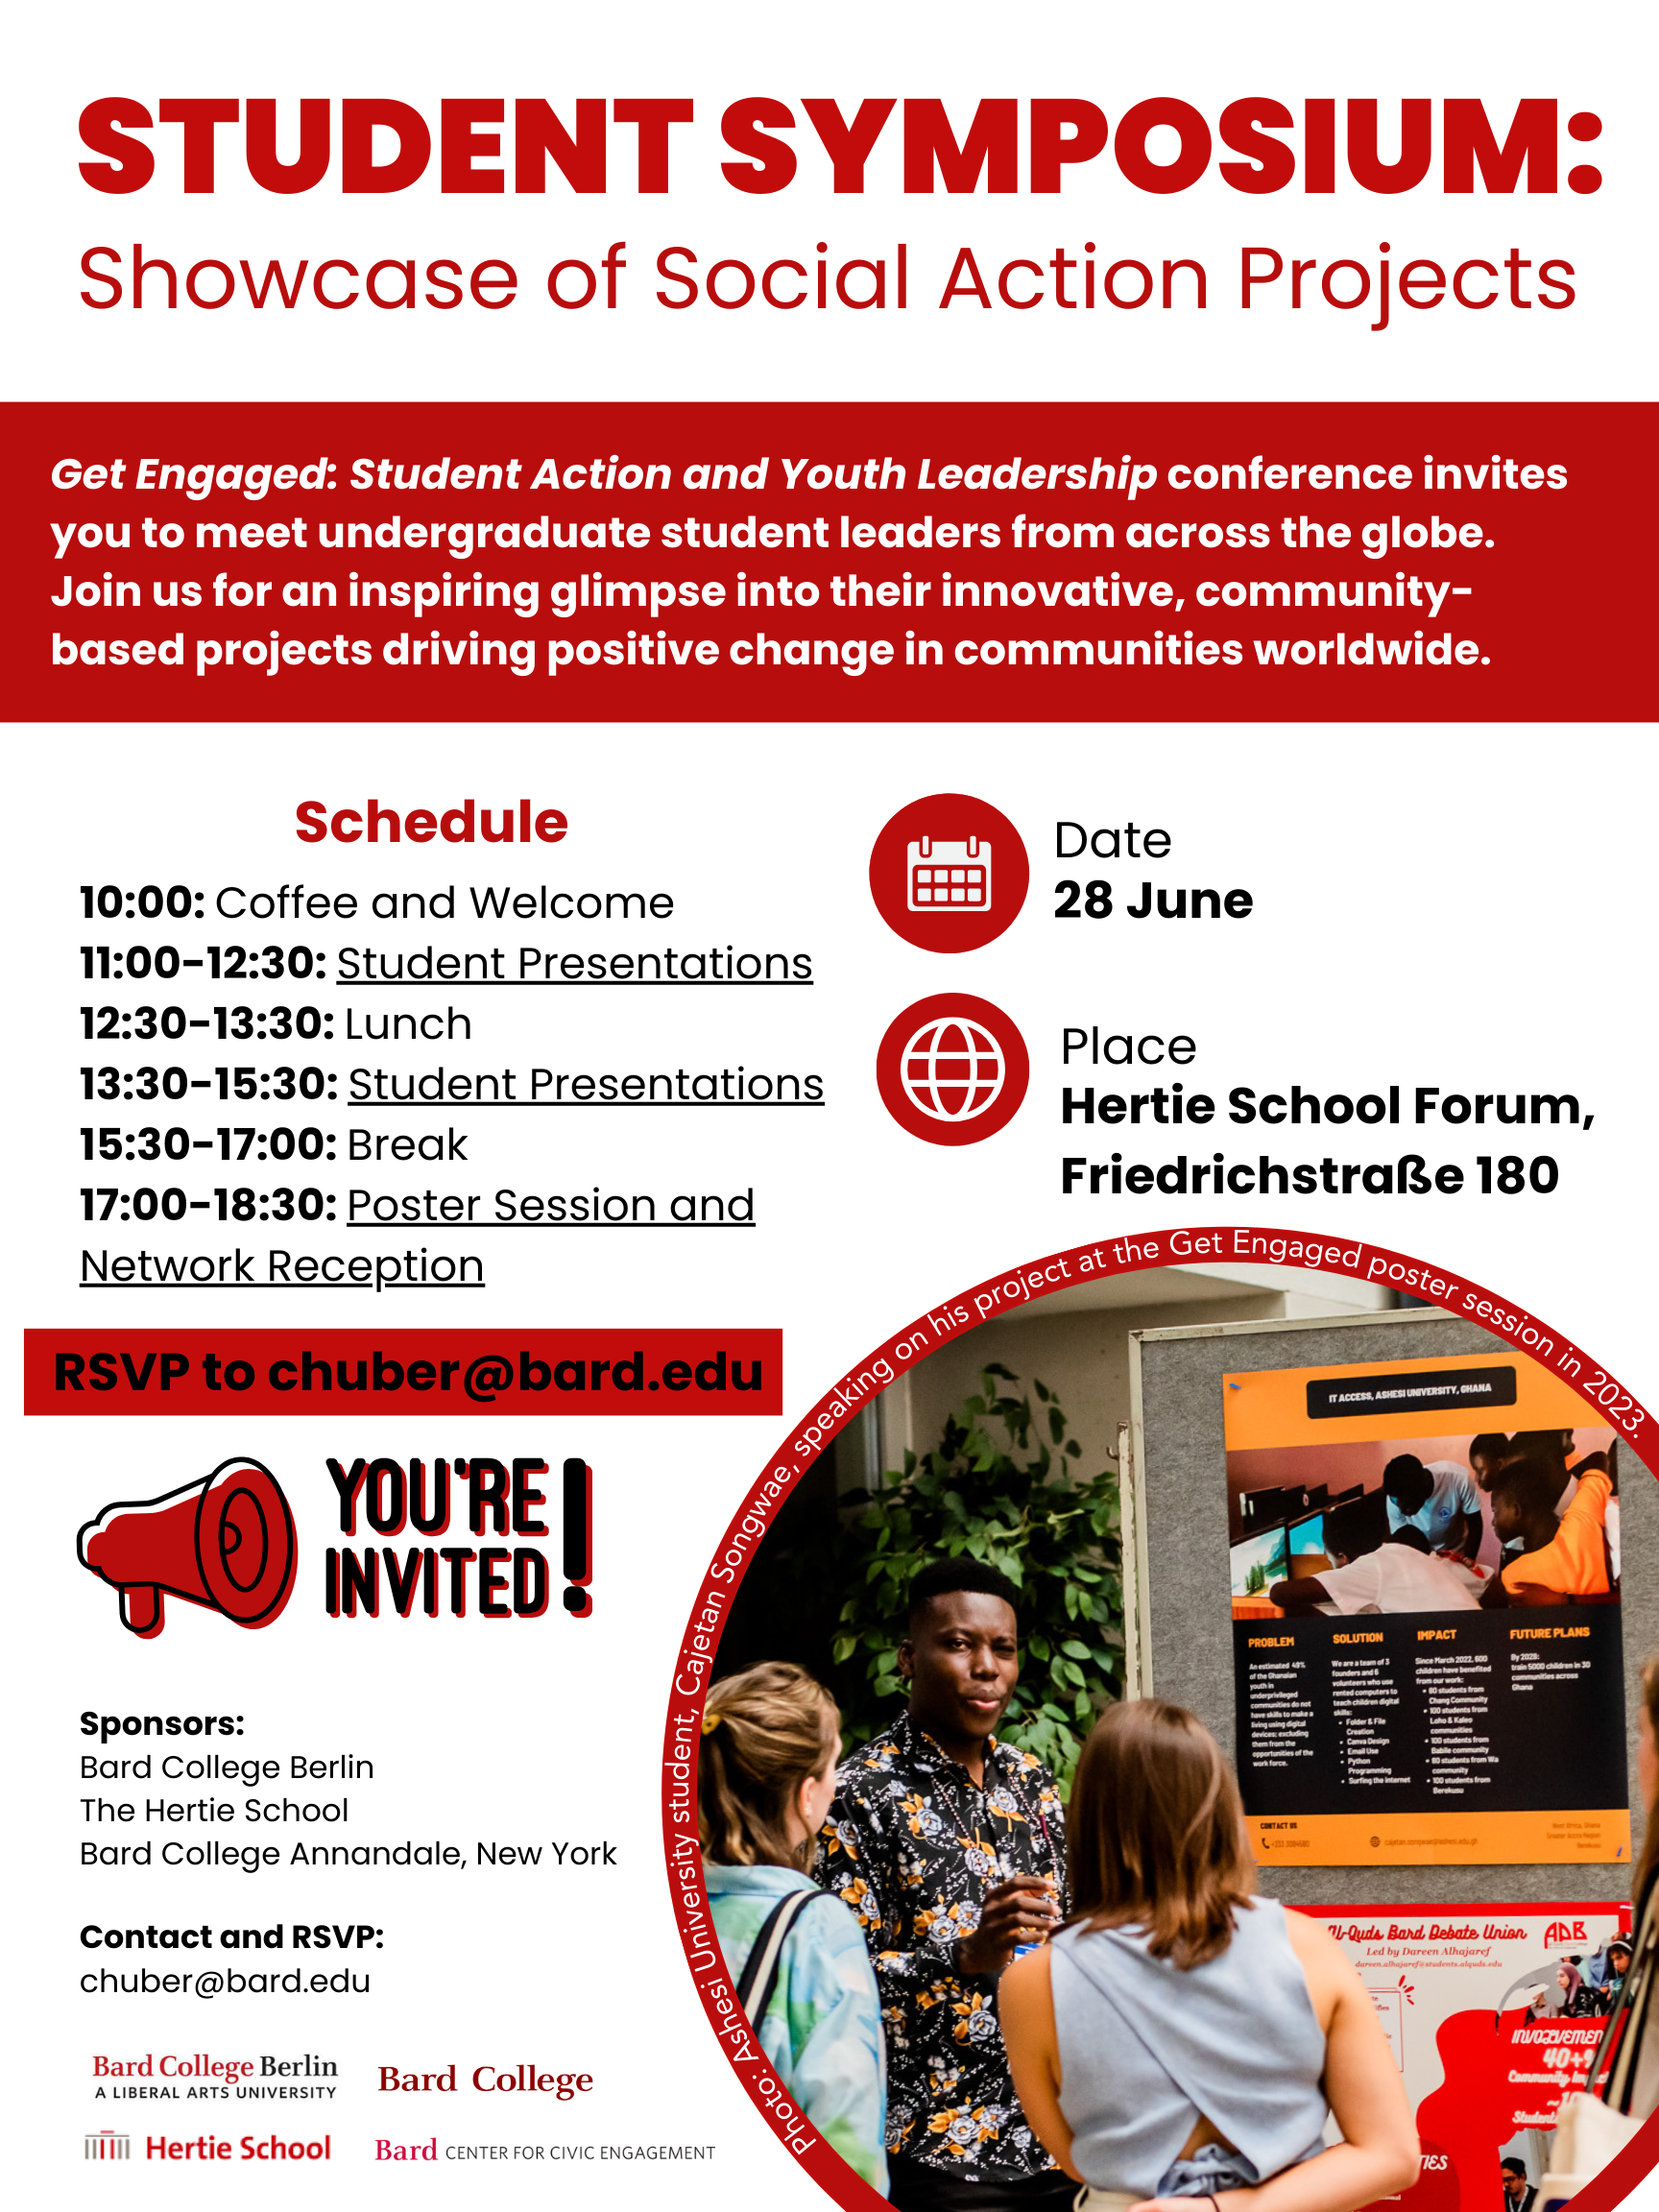 Get Engaged Conference Student Symposium: Showcase of Social Action Projects